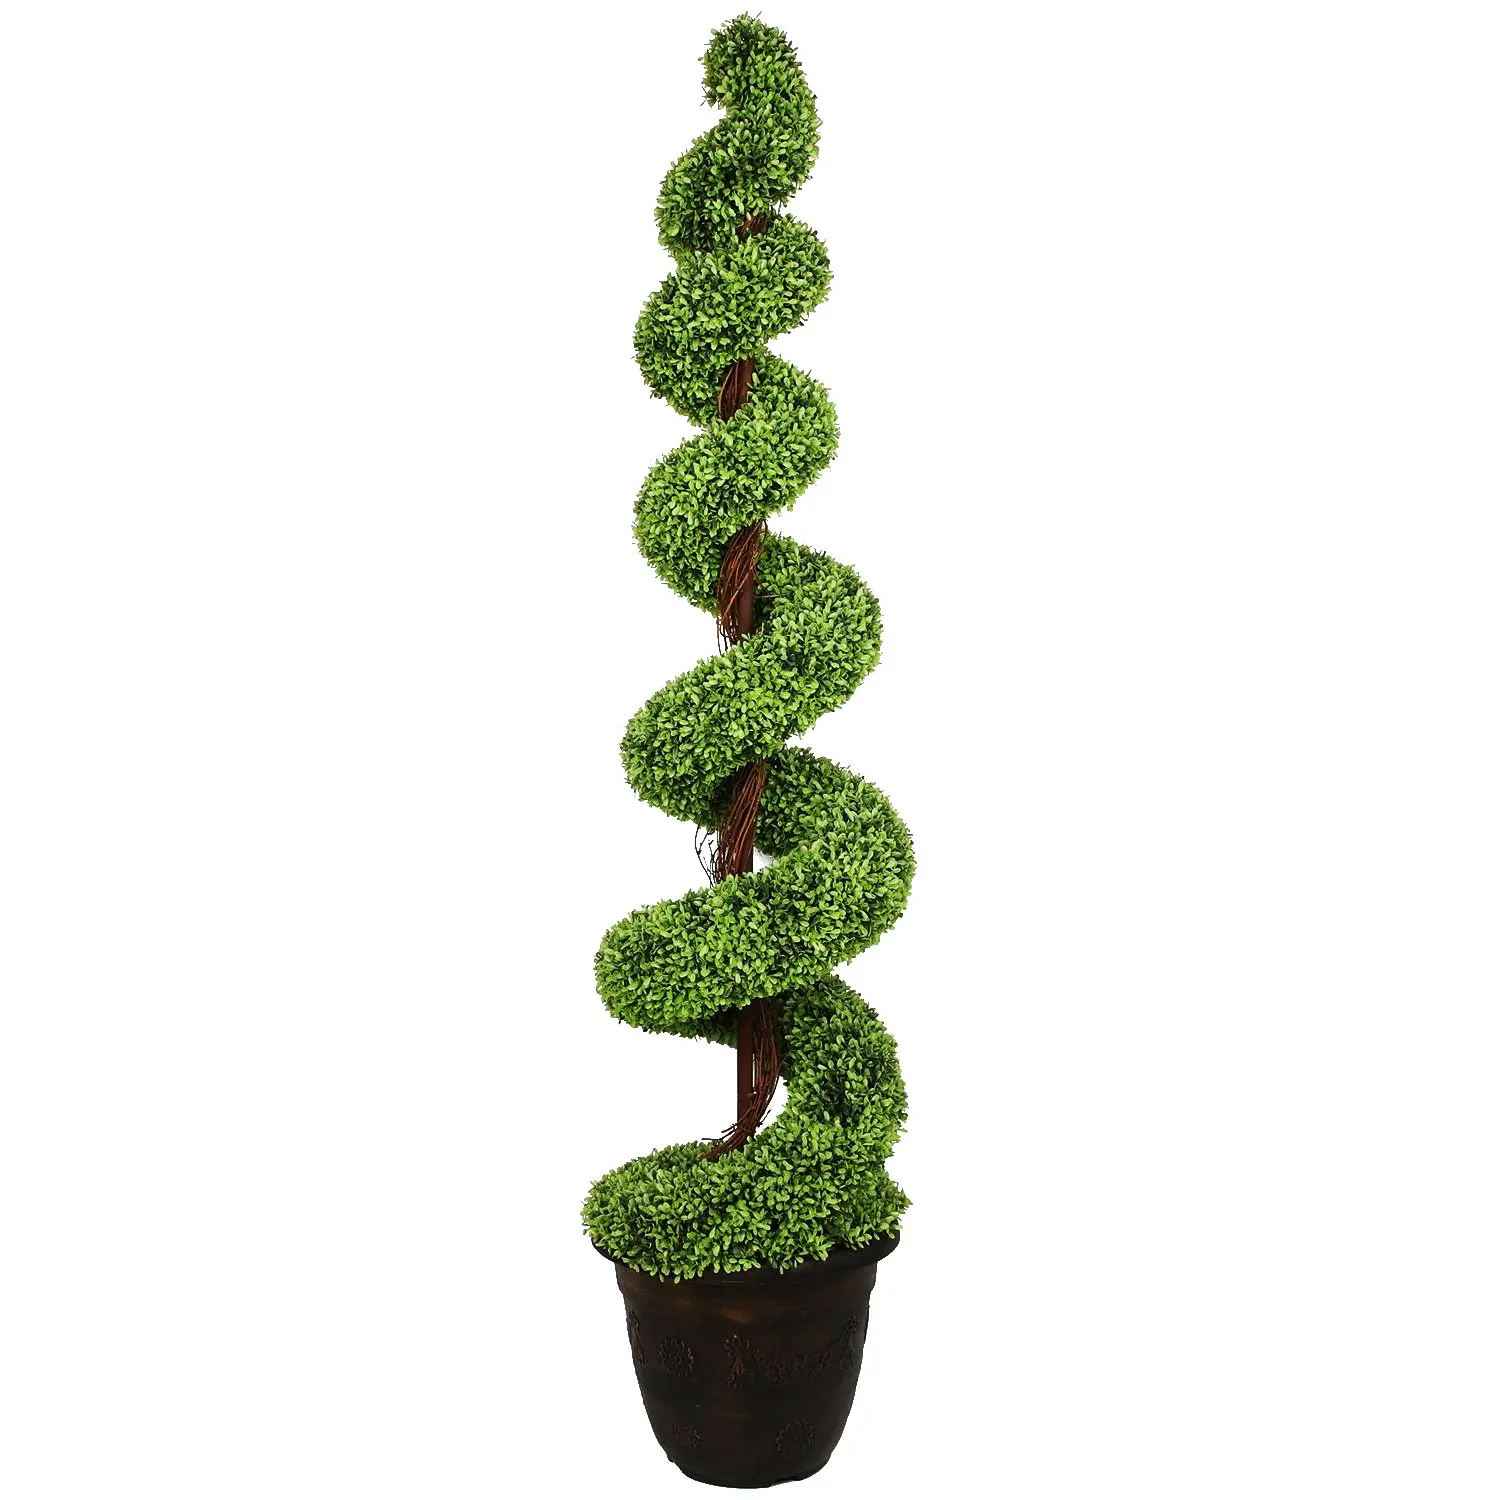 Decorative Indoor Outdoor Topiary Trees Boxwood Artificial Plants Spiral Faux Plants Potted Green Plant